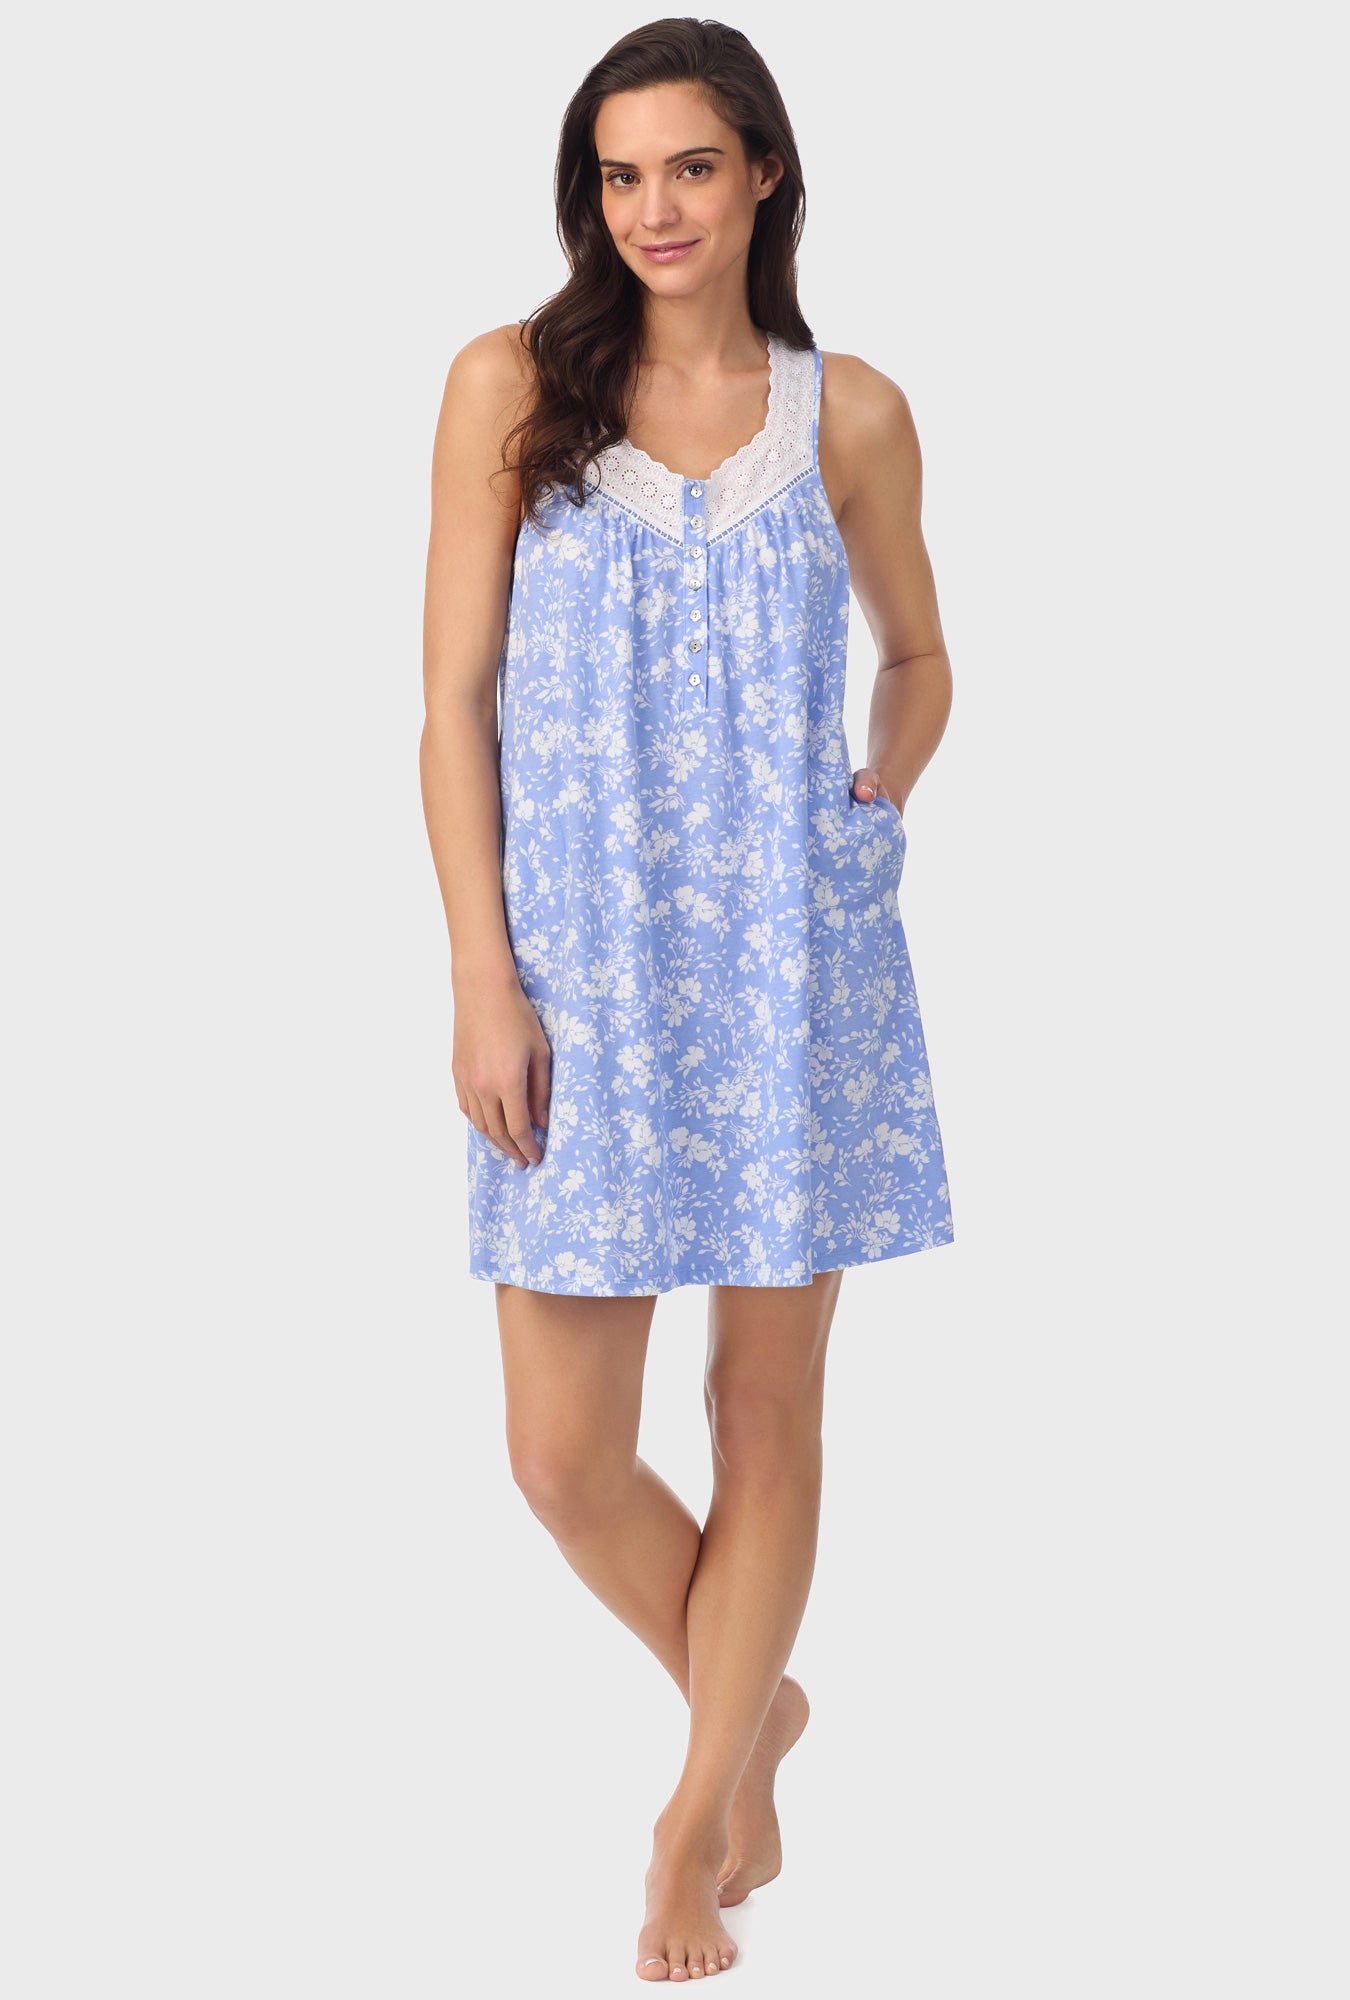 A lady wearing blue sleeveless Floral Sleeveless Chemise with Powder Blue print